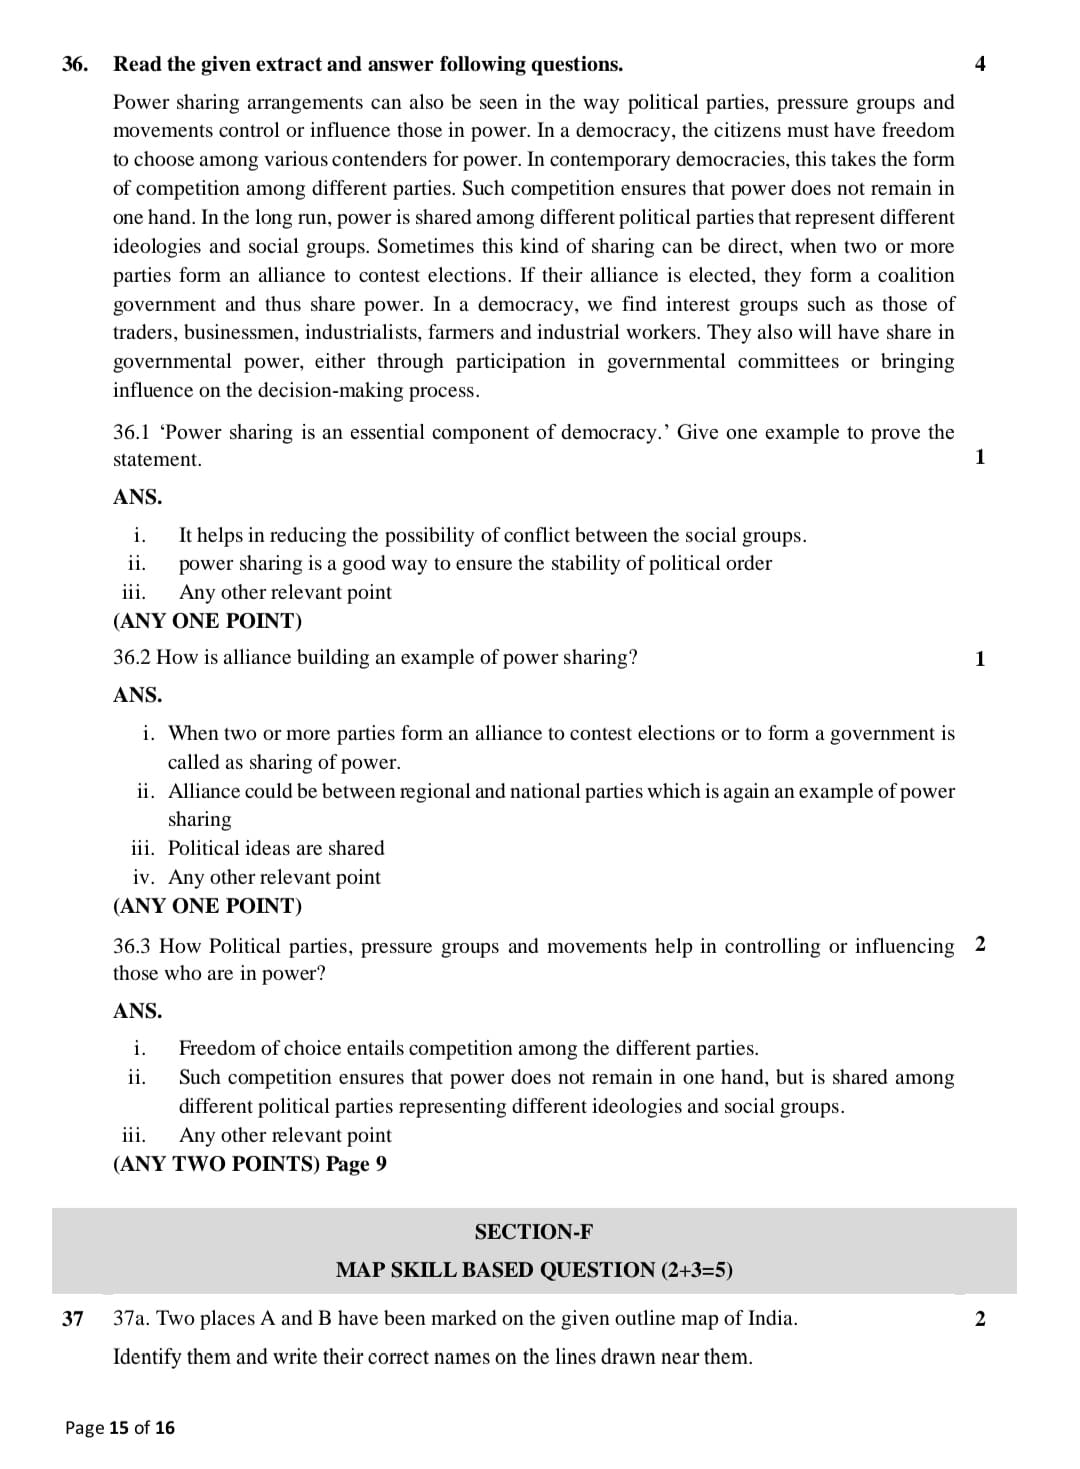 cbse class 10 social science official sample question paper15